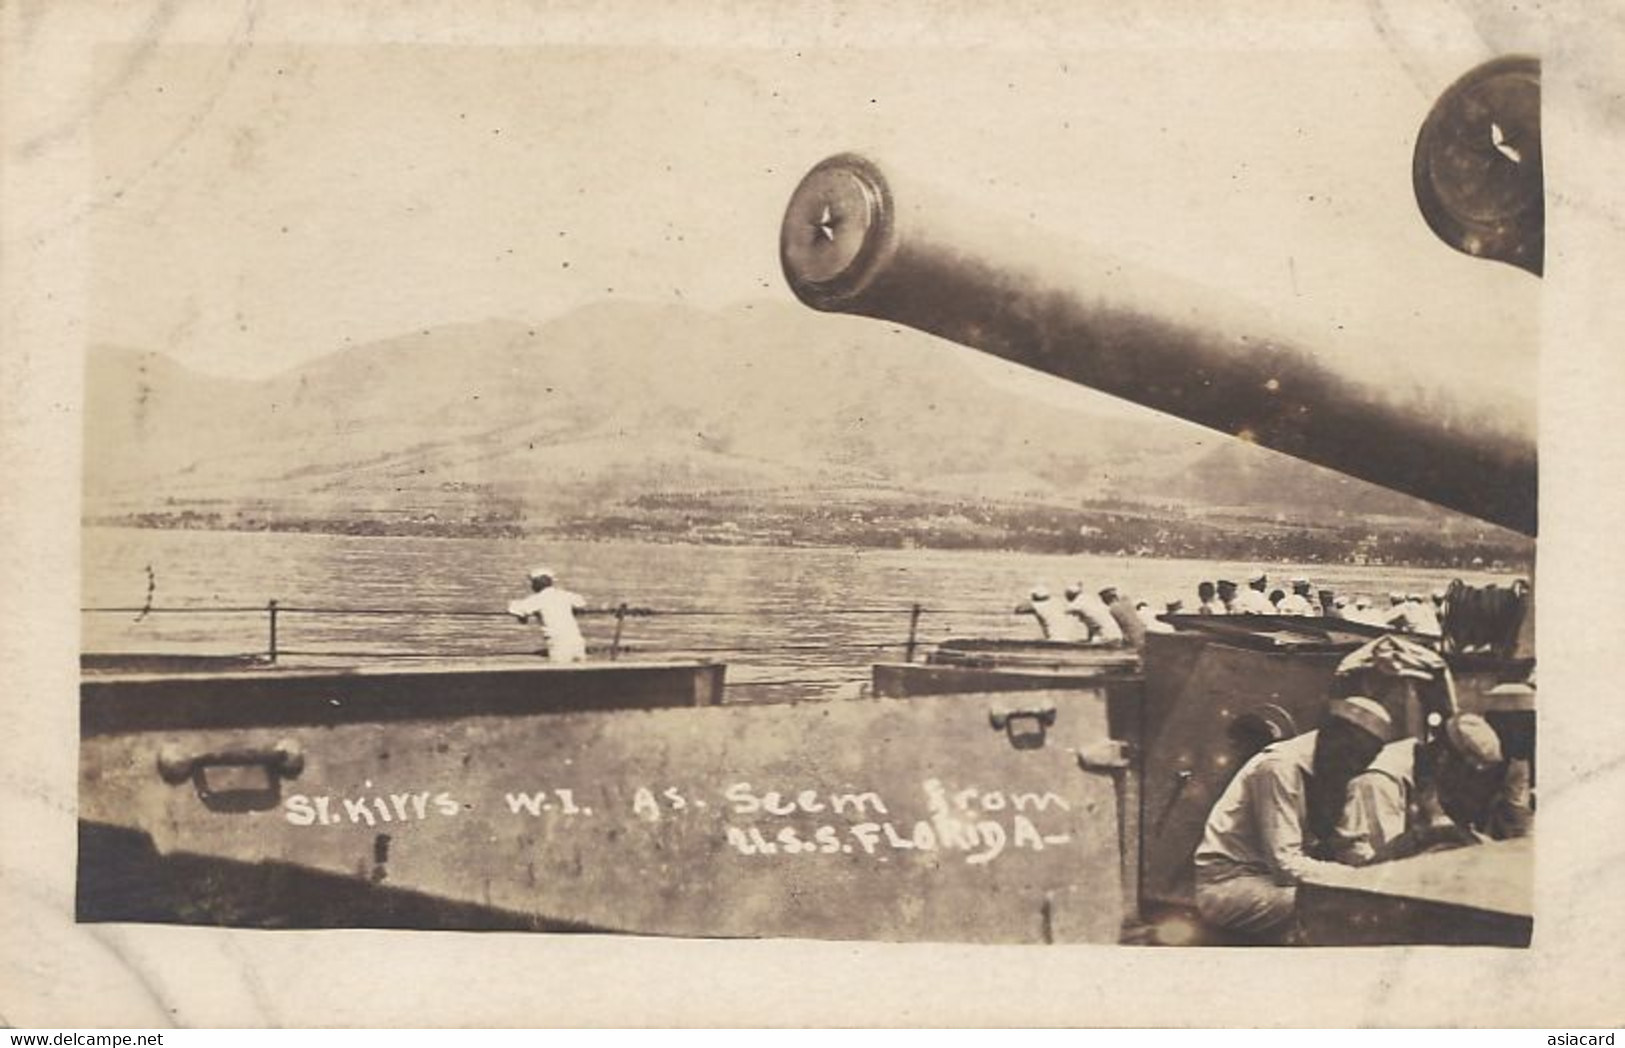 St Kitts Real Photo As Seen From U.S.S.  " Florida " War Ship  B.W.I. - Saint Kitts E Nevis